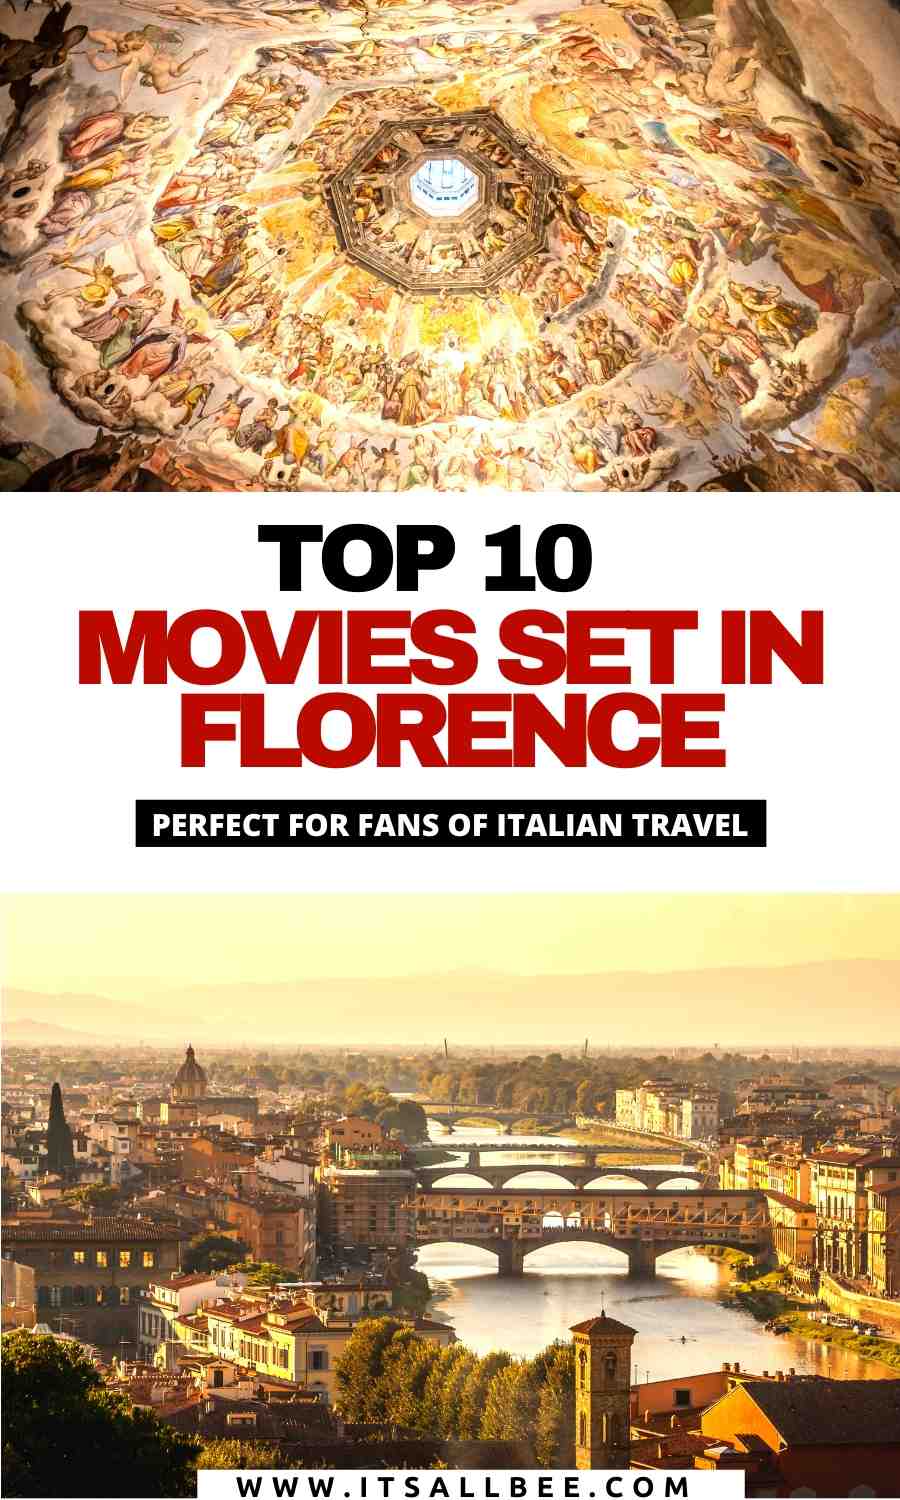 Top 10 Movies Set In Florence Italy - ItsAllBee | Solo Travel